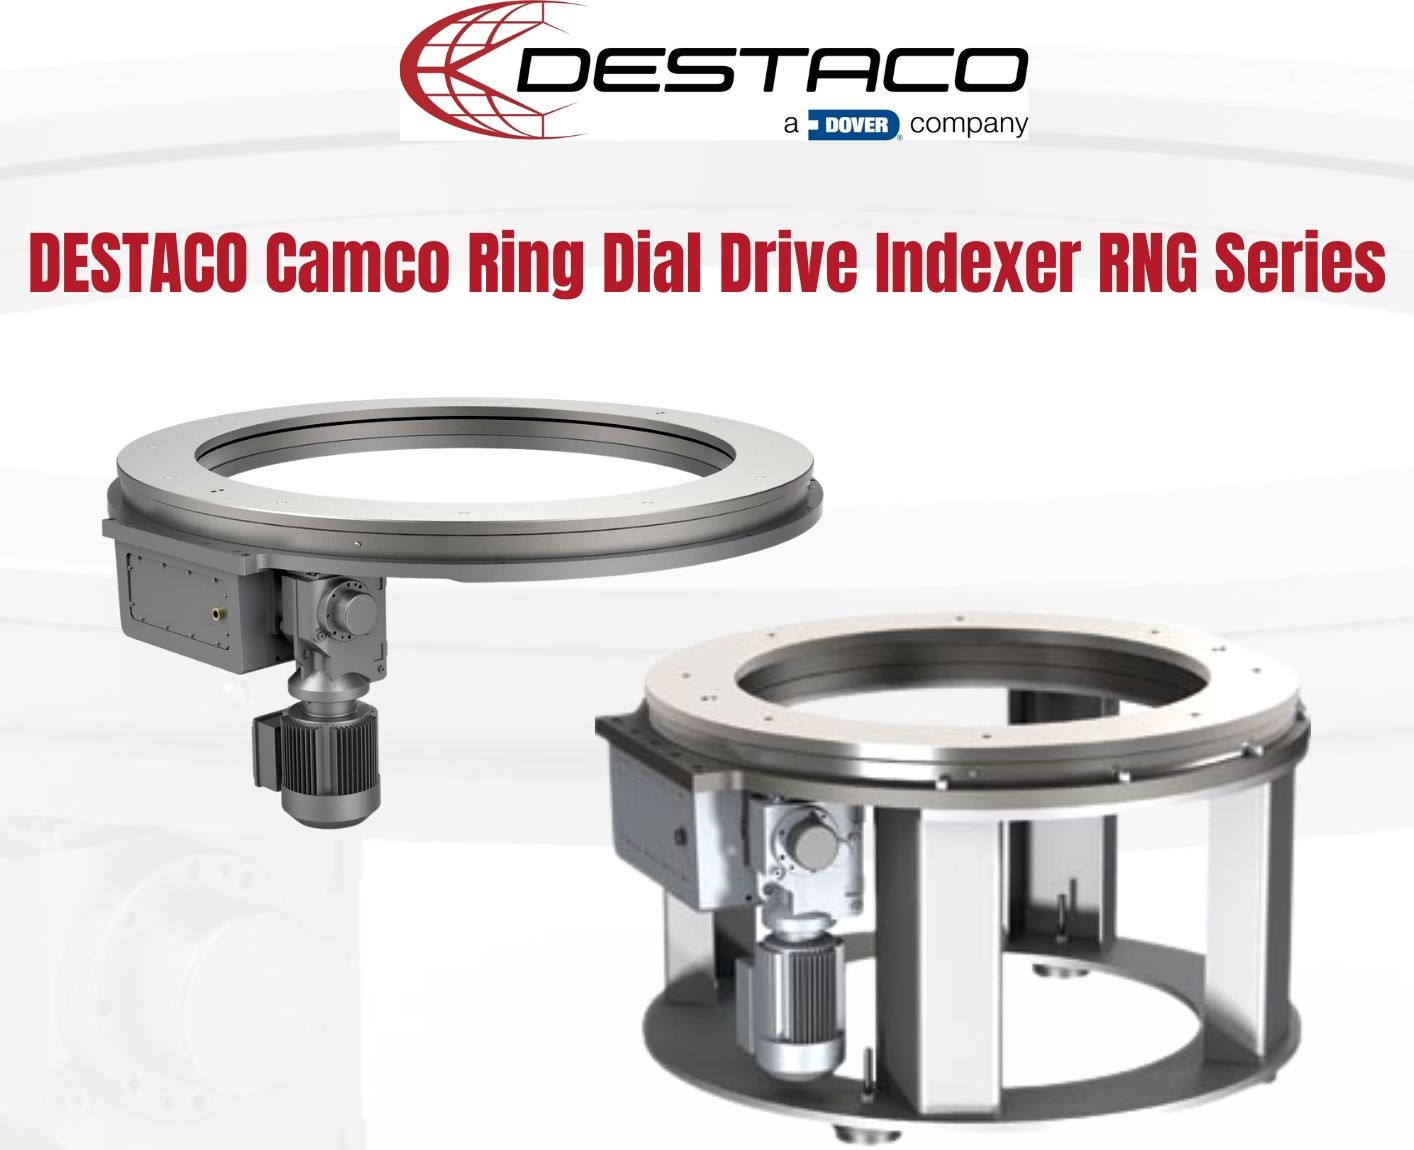 Destaco Camco Rotaary Indexing Ring